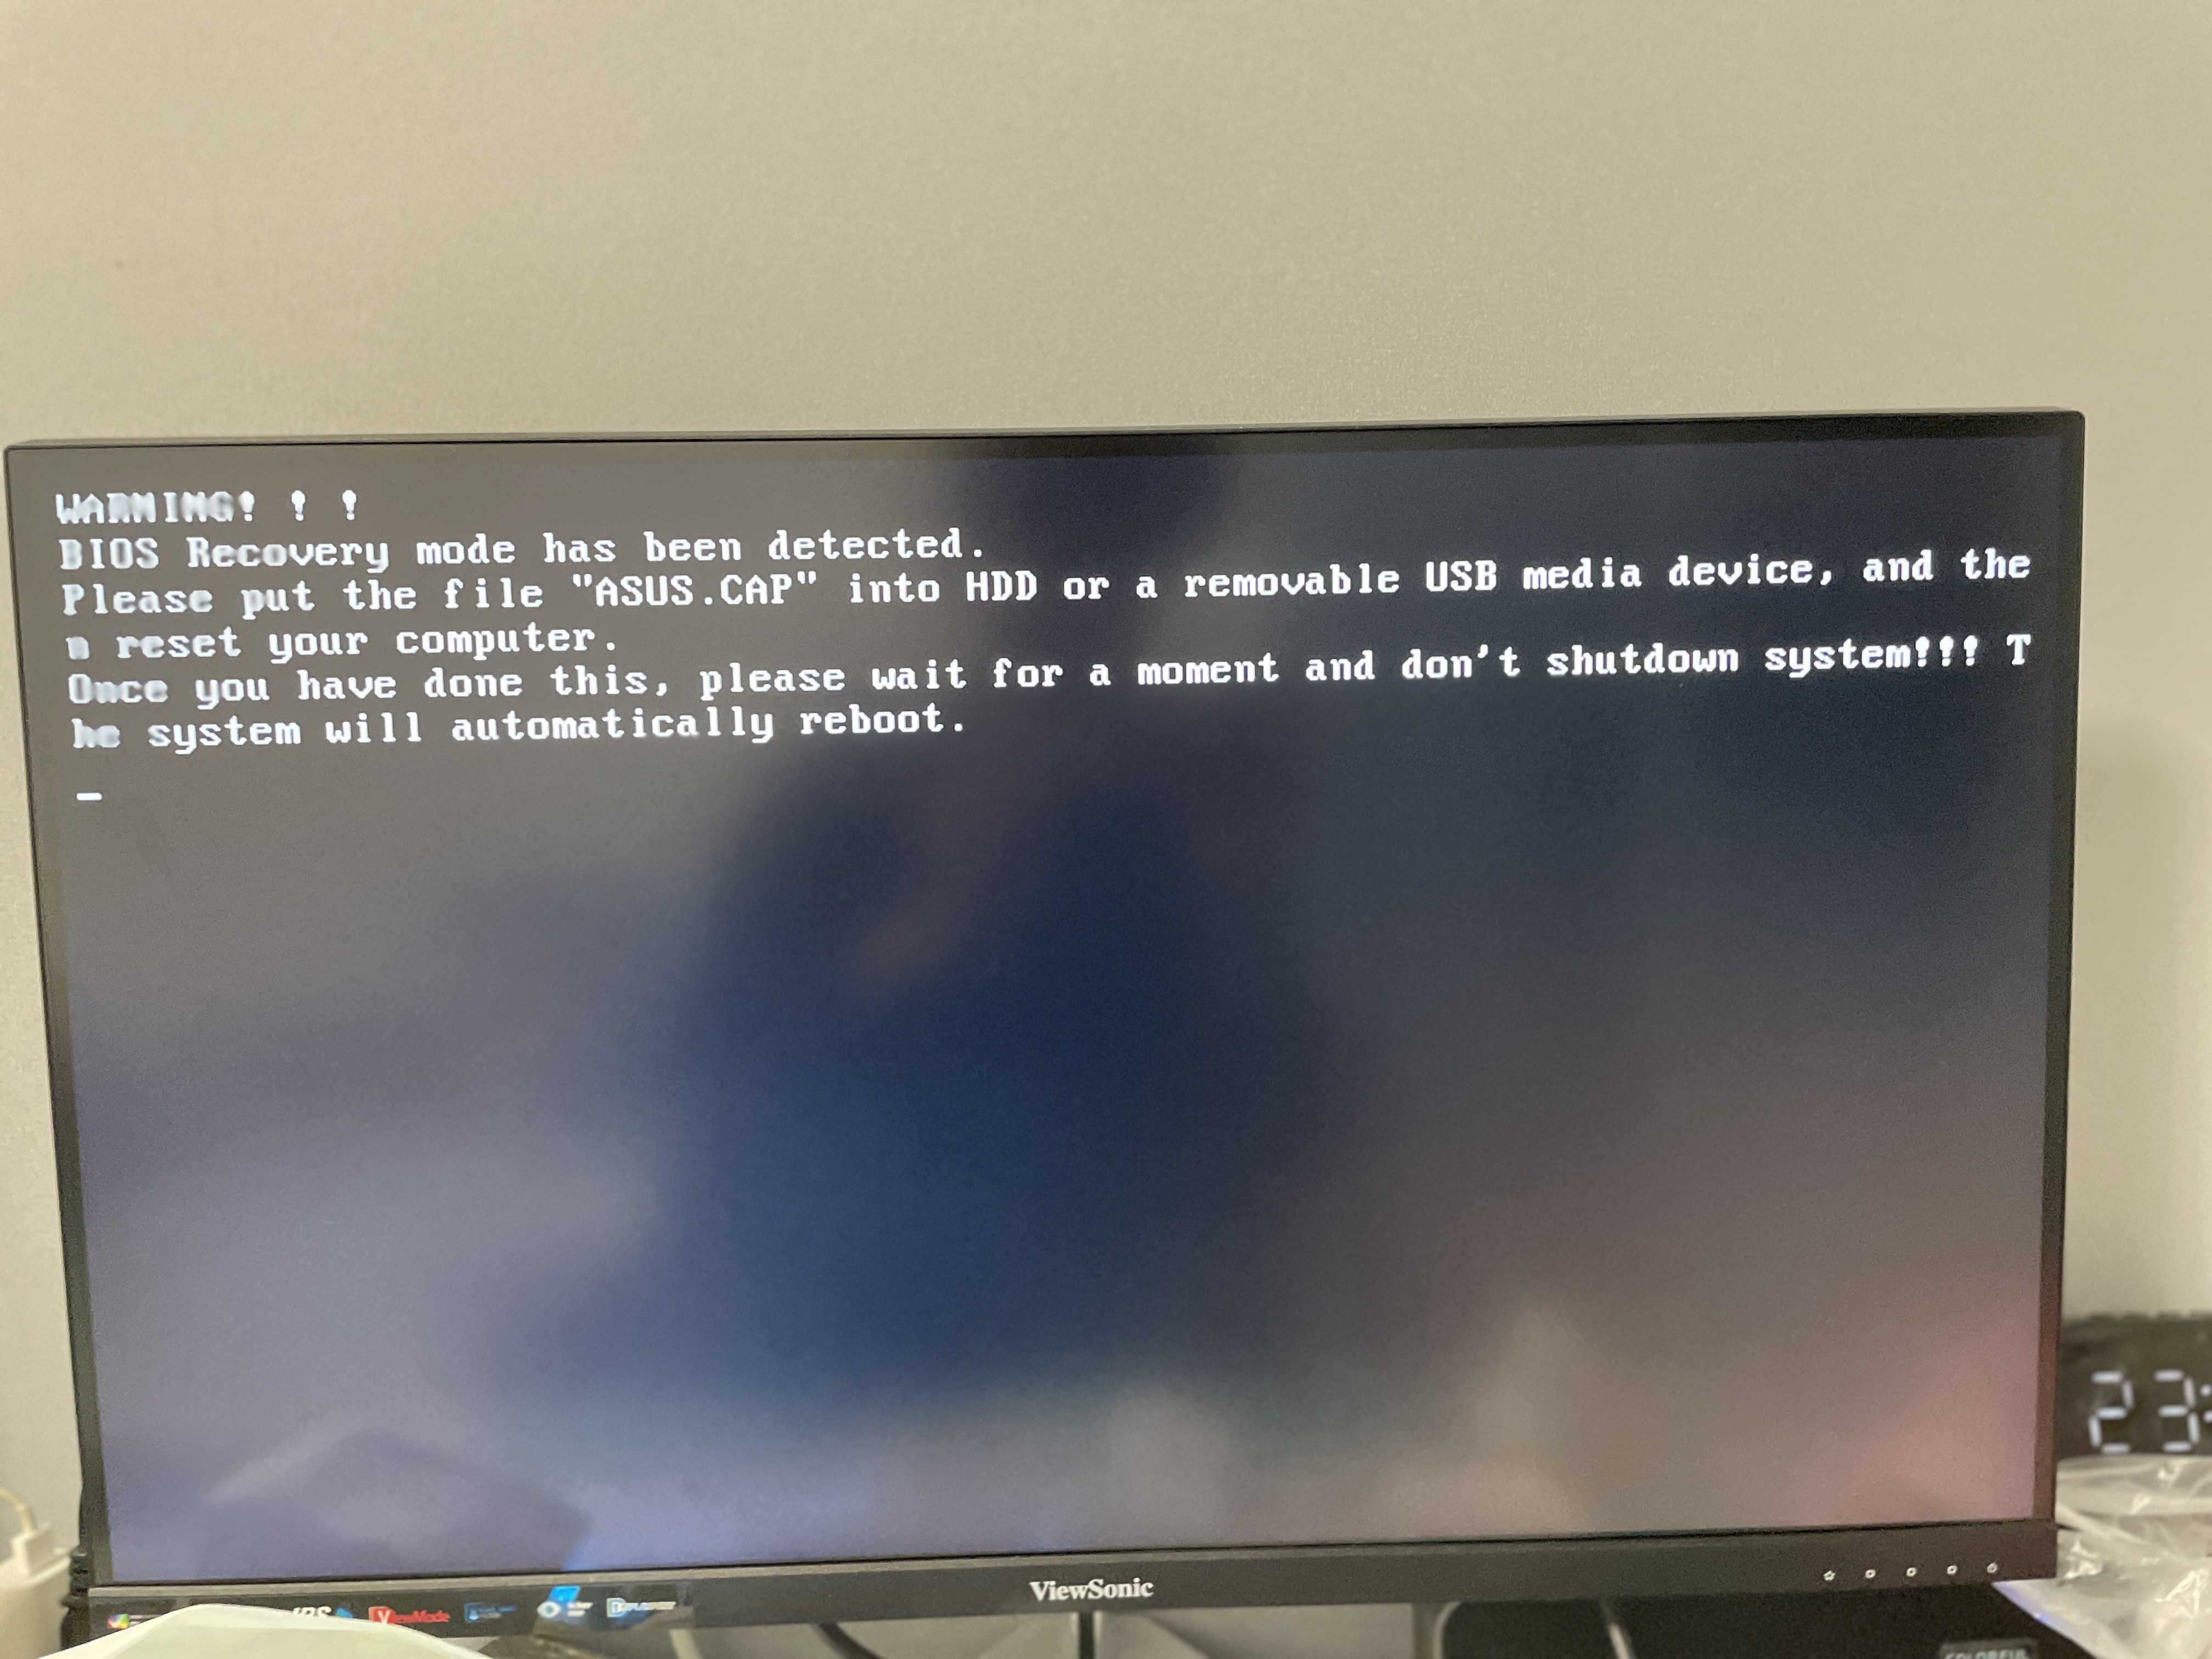 WARMING! ! ! BIOS Recovery mode has been detected. Please put the file “ASUS. CAp“ into HDD or a rem